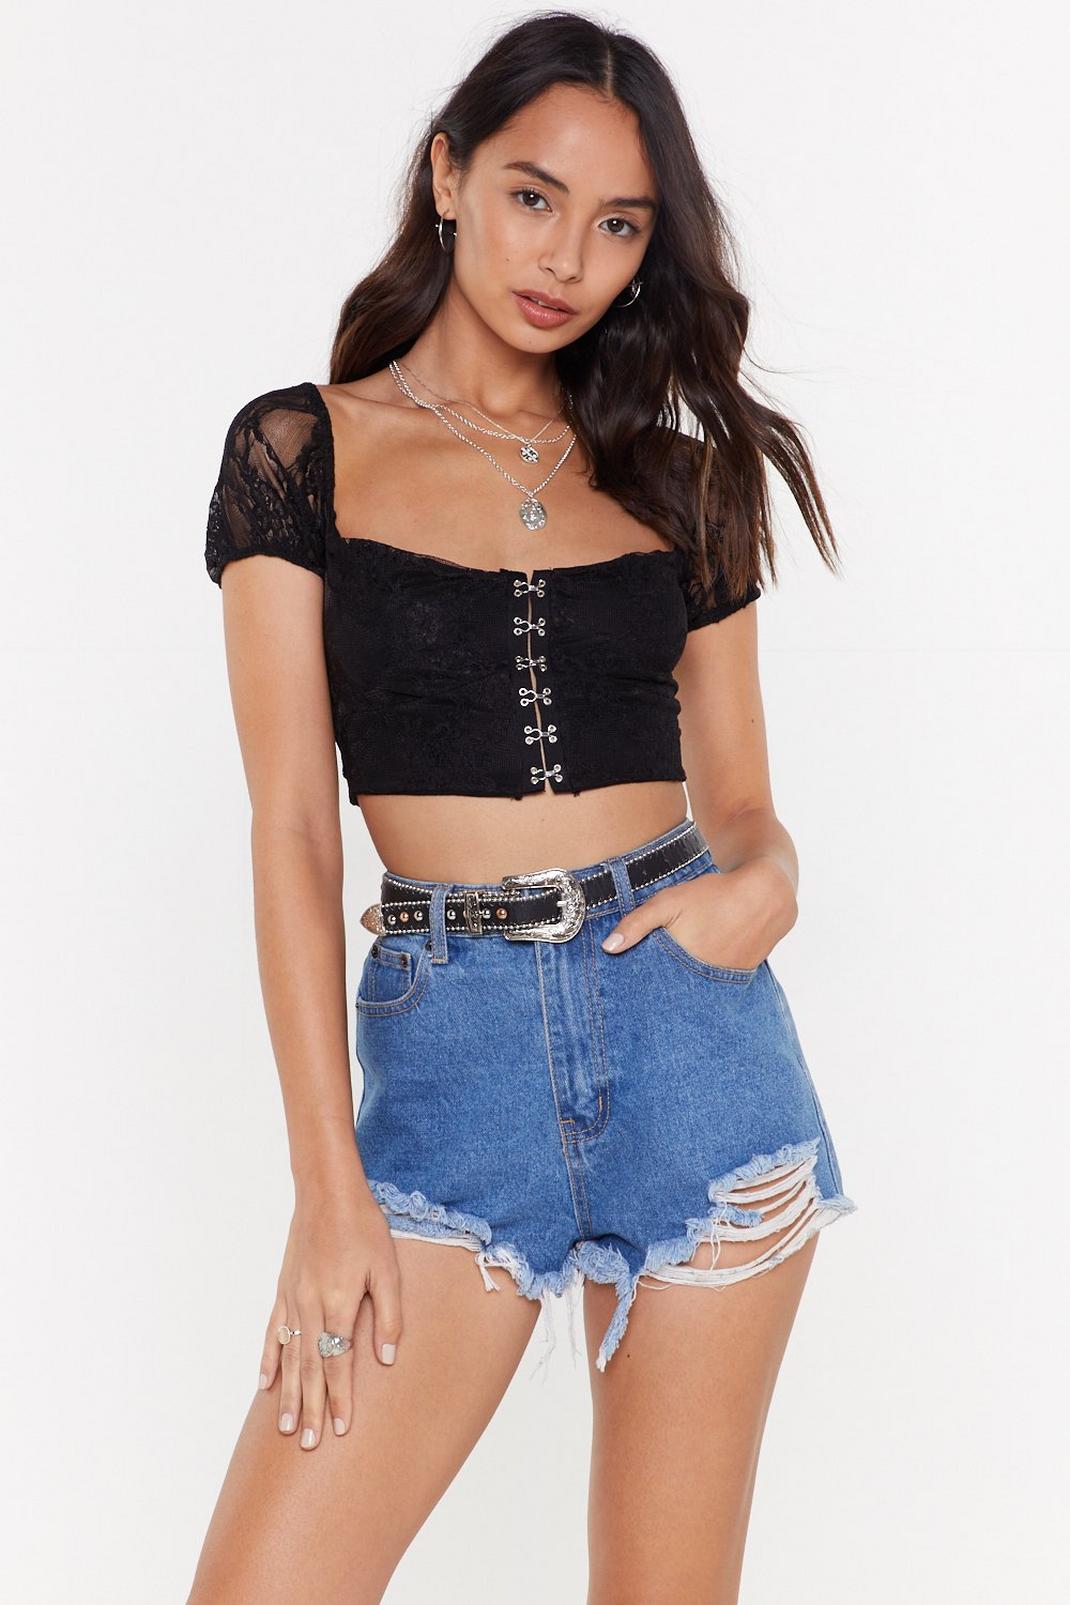 Hooked On You Hook and Eye Lace Crop Top